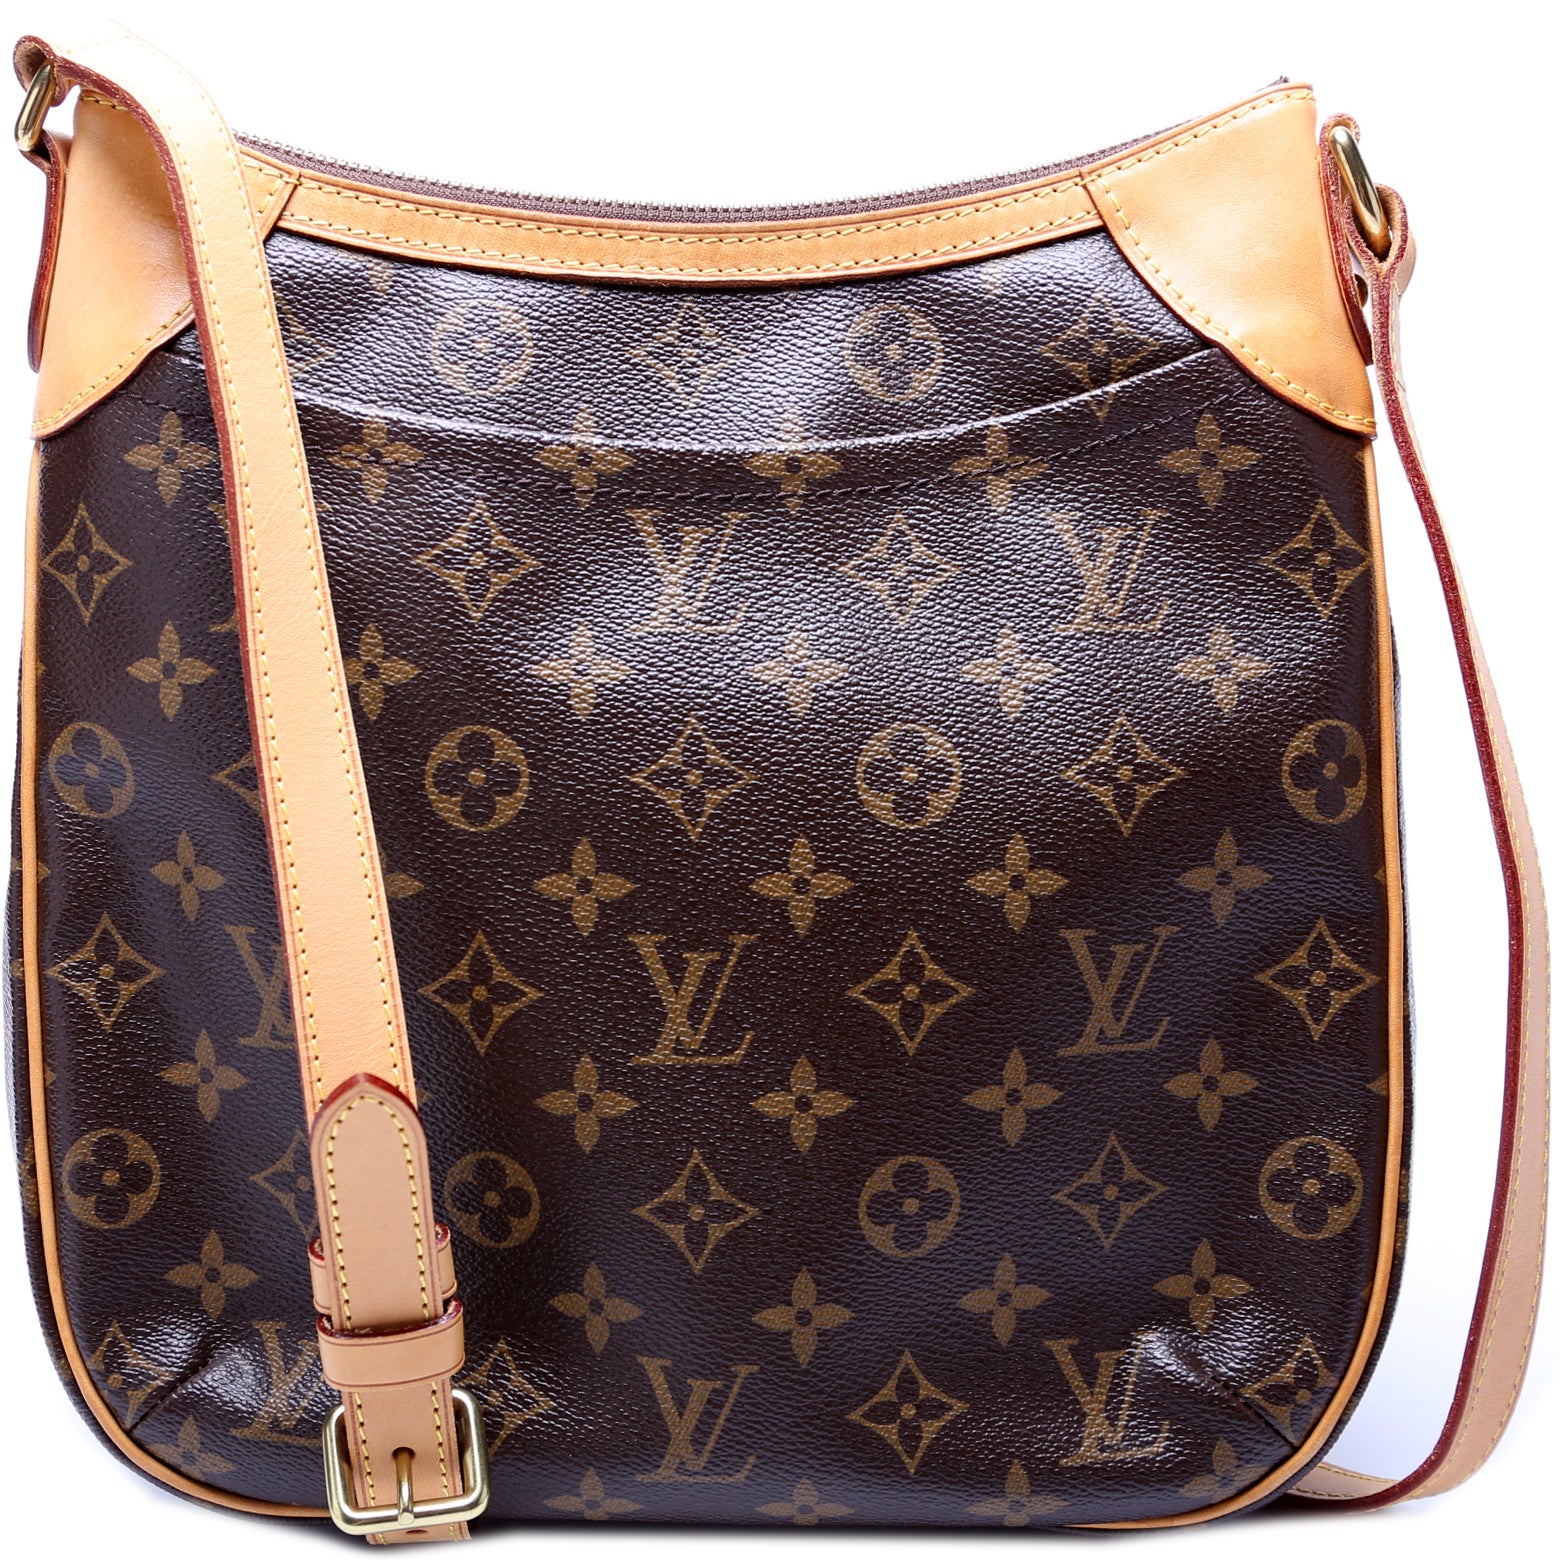 Beautiful previously owned Louis Vuitton Odeon messenger pm